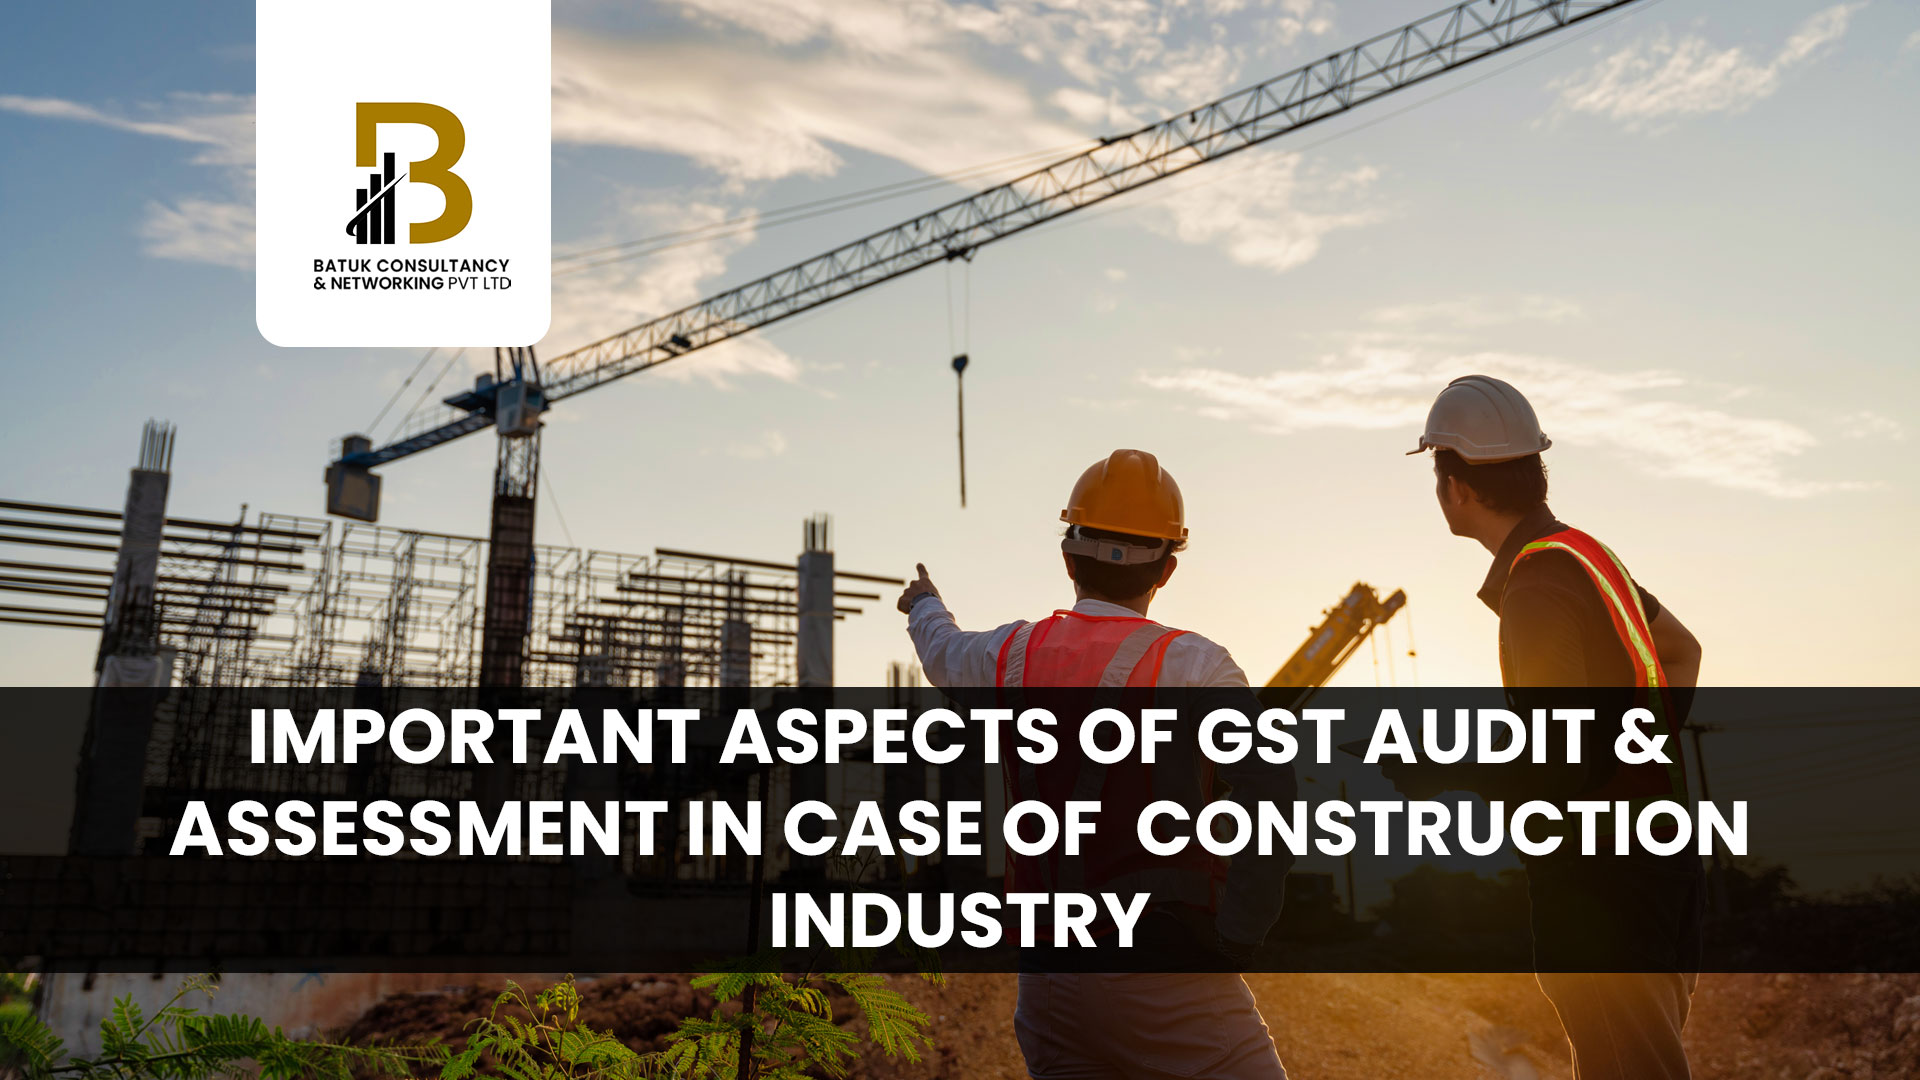 IMPORTANT ASPECTS OF GST AUDIT & ASSESSMENT IN CASE OF CONSTRUCTION INDUSTRY